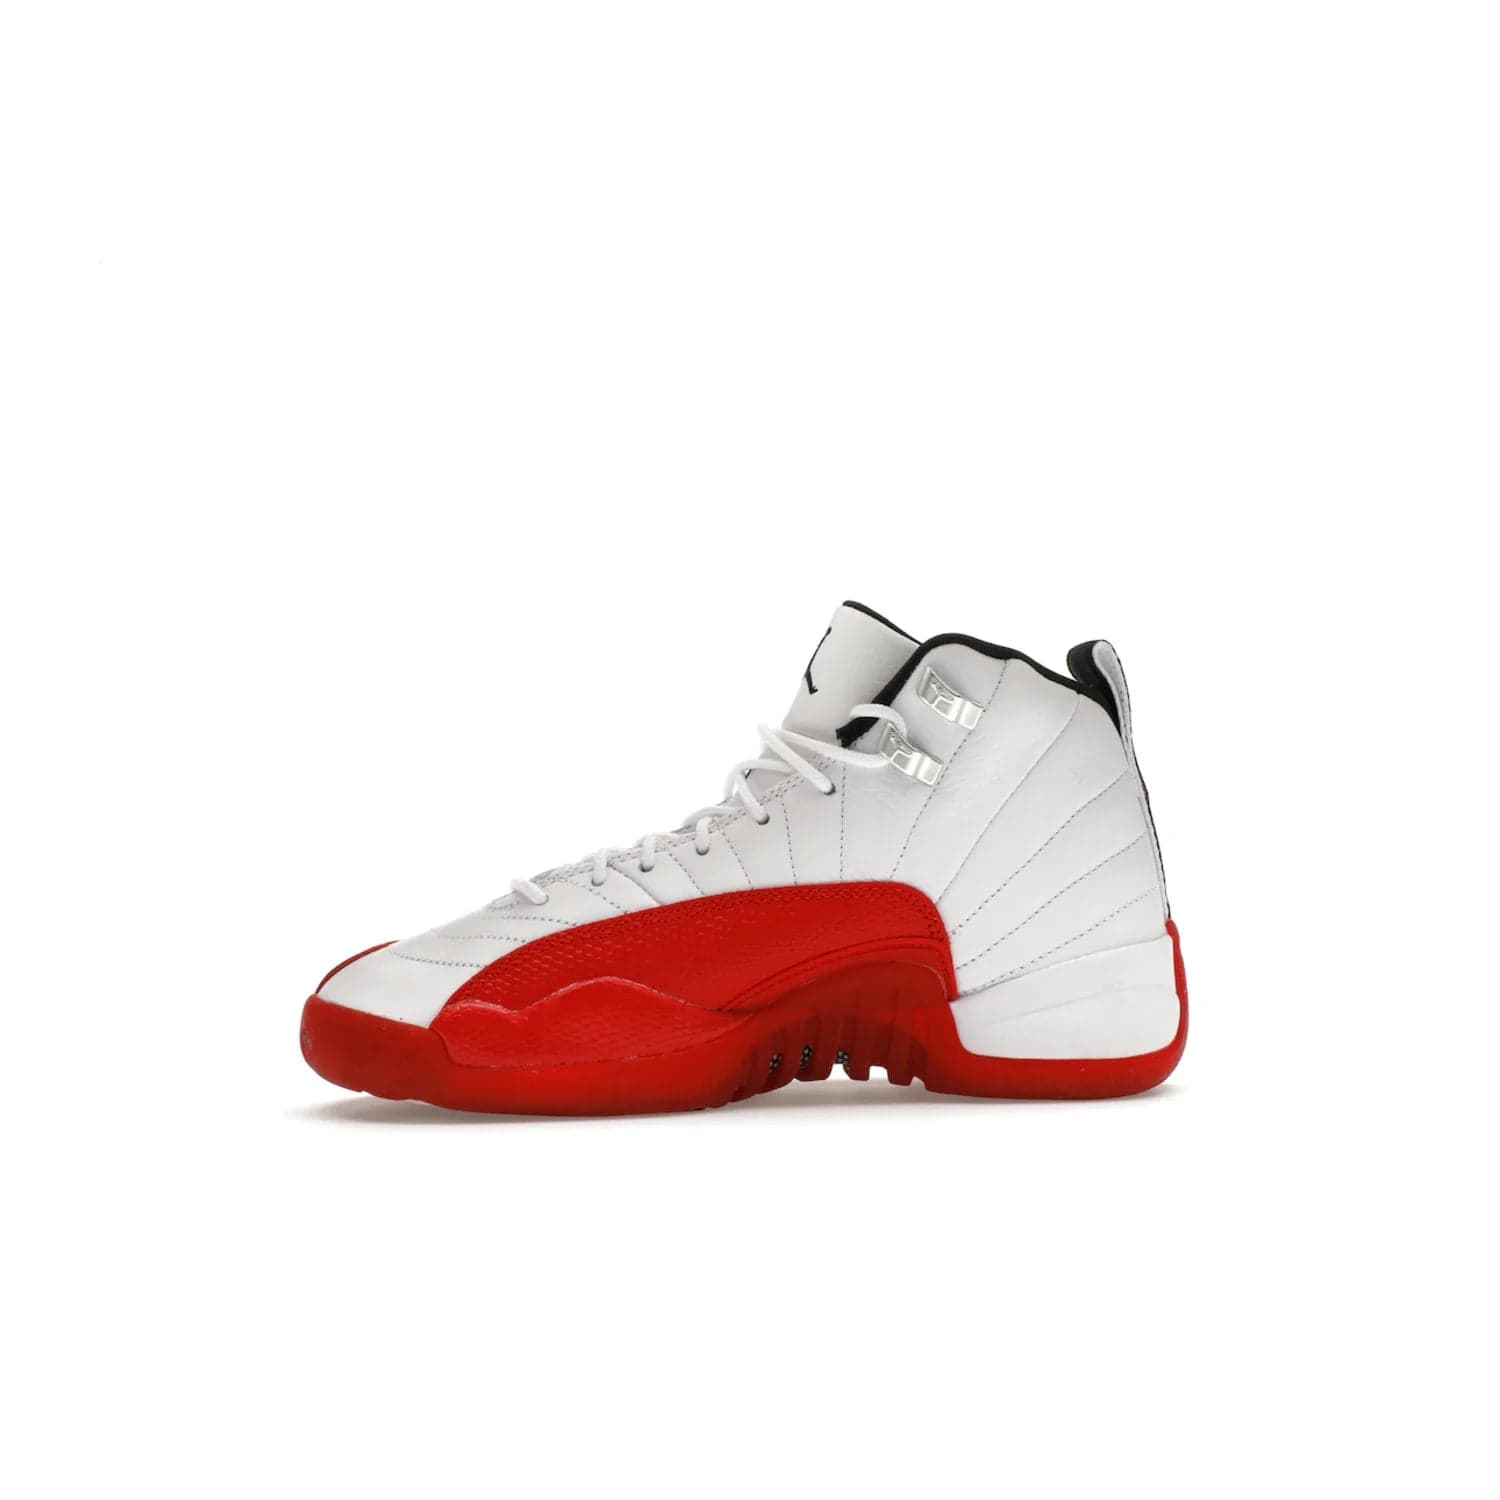 Jordan 12 Retro Cherry (2023) (GS) - Image 18 - Only at www.BallersClubKickz.com - Grab the Jordan 12 Retro Cherry (2023) (GS) and show off your signature style with these iconic kicks. Dressed in White, Black and Varsity Red, these timeless kicks are sure to turn heads. Available October 28, 2023.